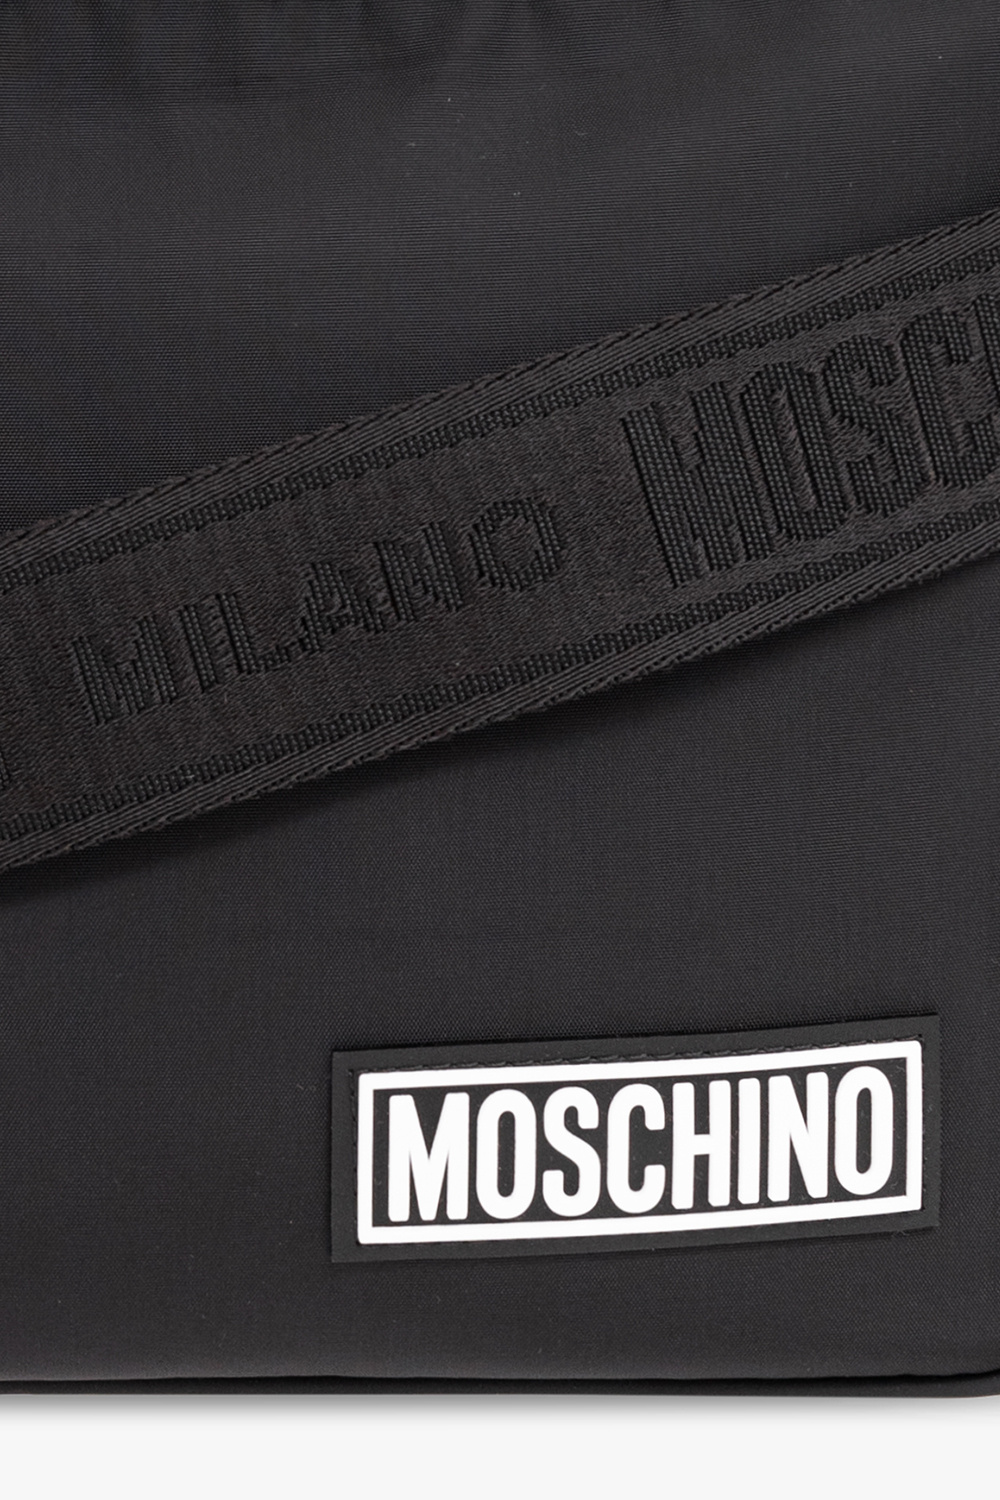 Moschino Black faux fur bag with long shoulder strap and maxi M detail on the front with applied sequins